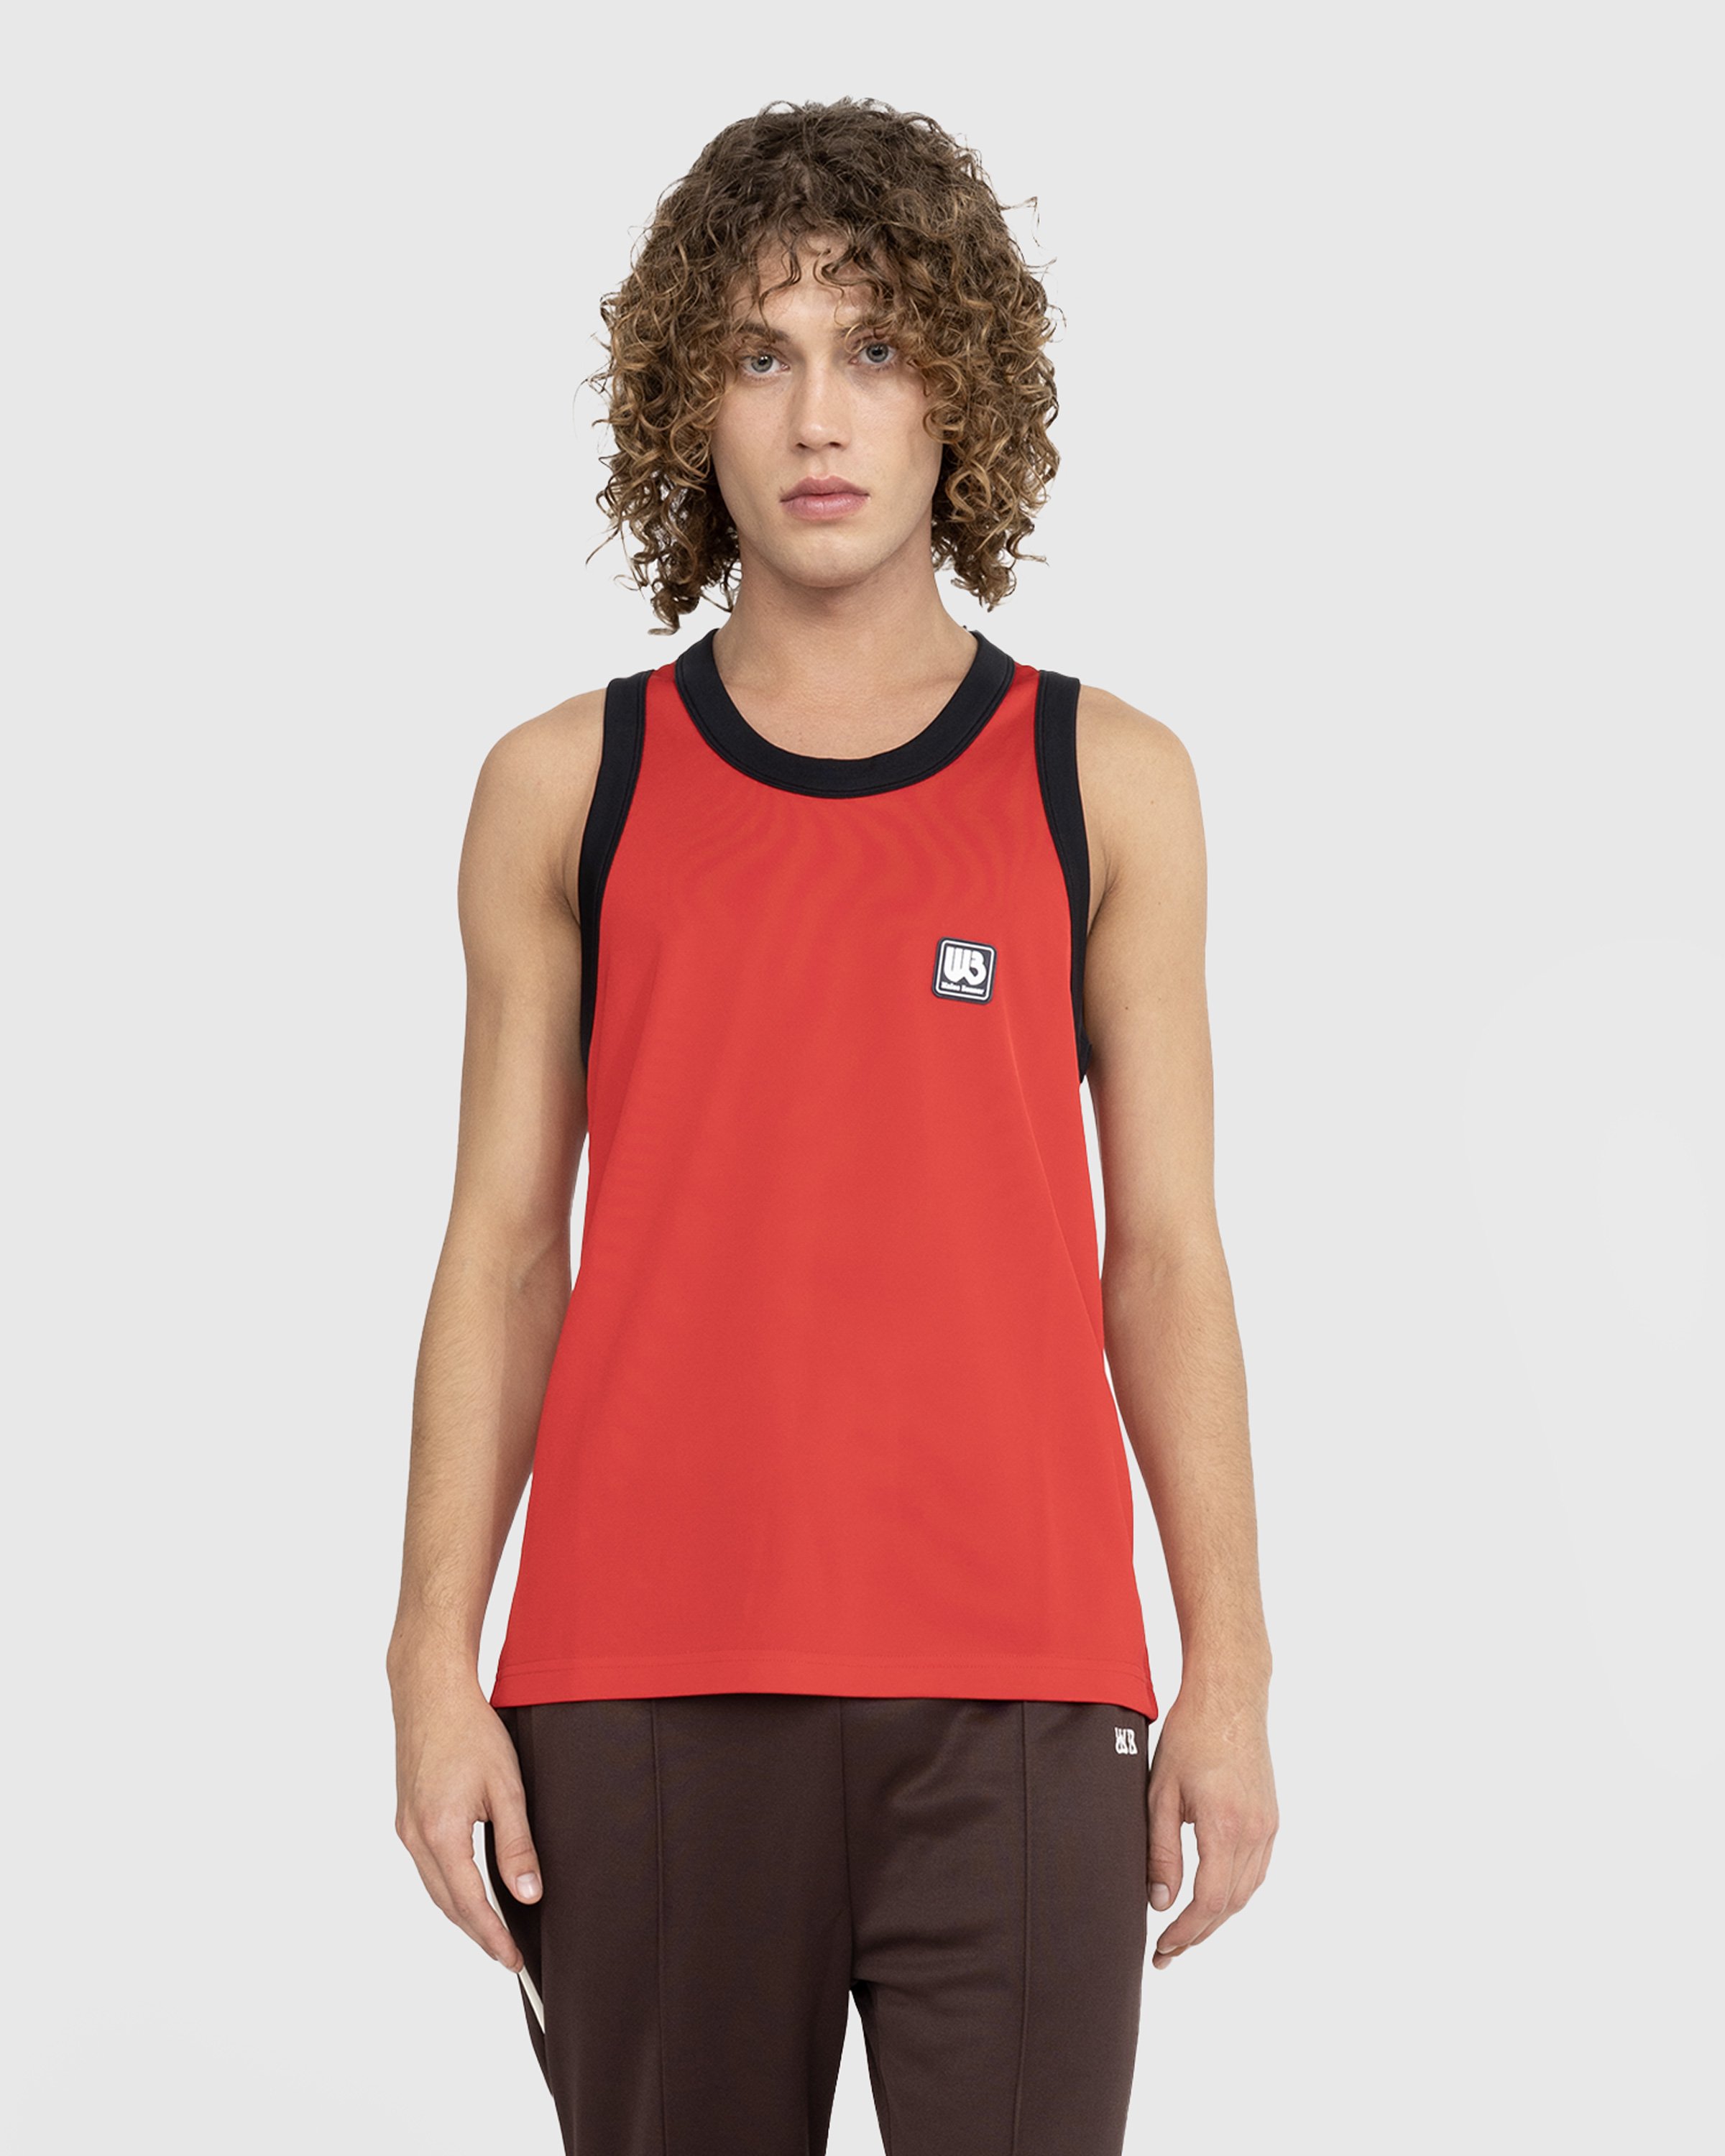 Wales Bonner - Diop Tank Top Red/Black - Clothing - Red - Image 2